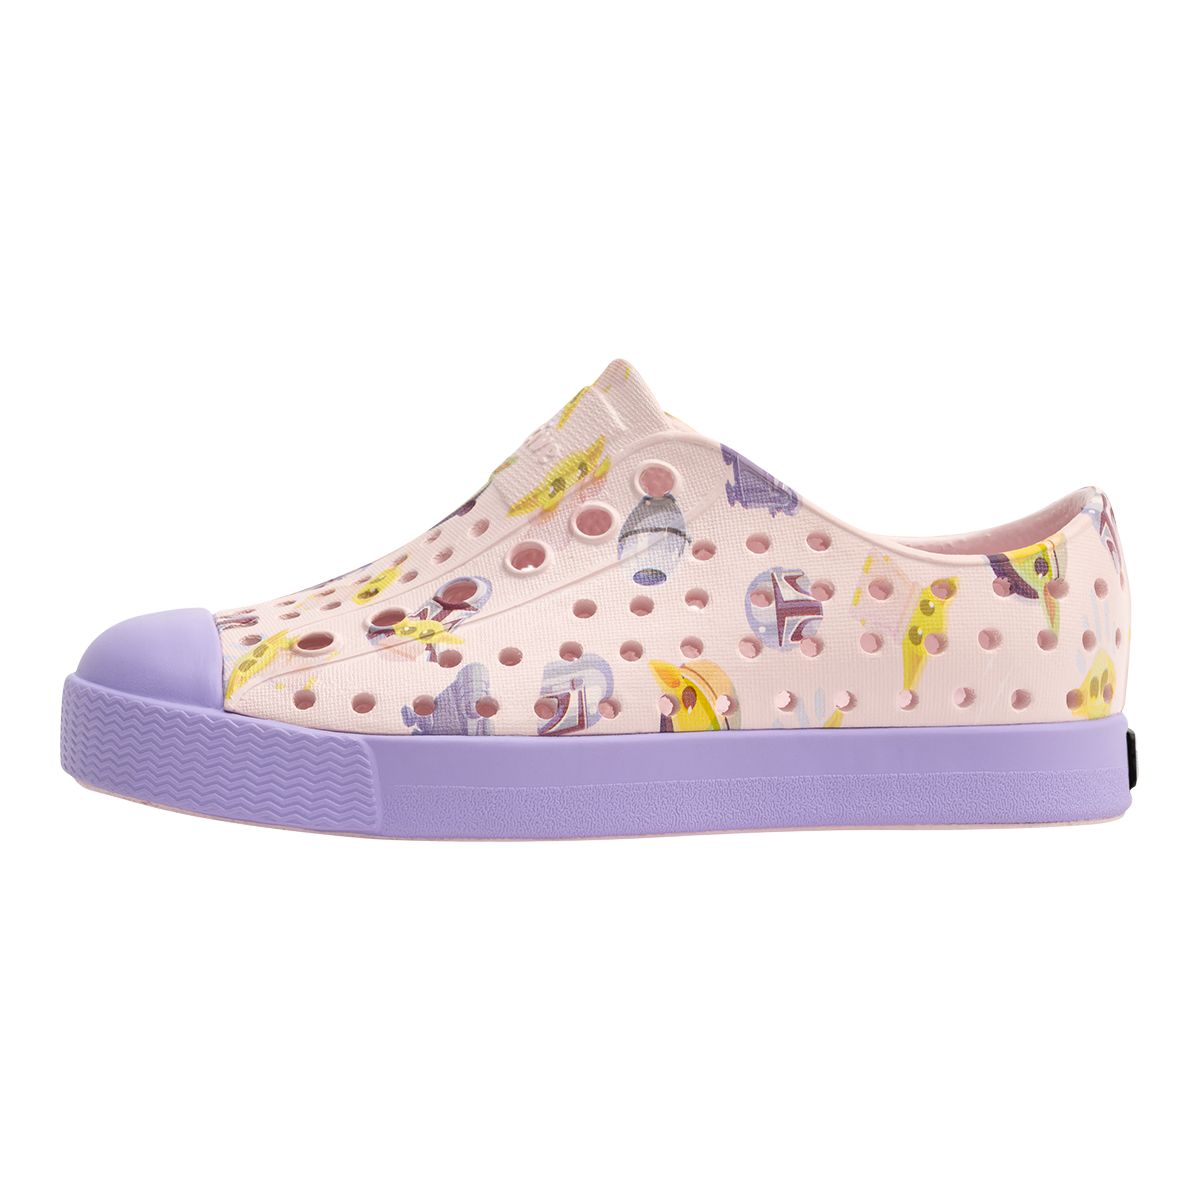 Image of Native Shoes Toddler Girls' Jefferson Mando All Over Print Shoes